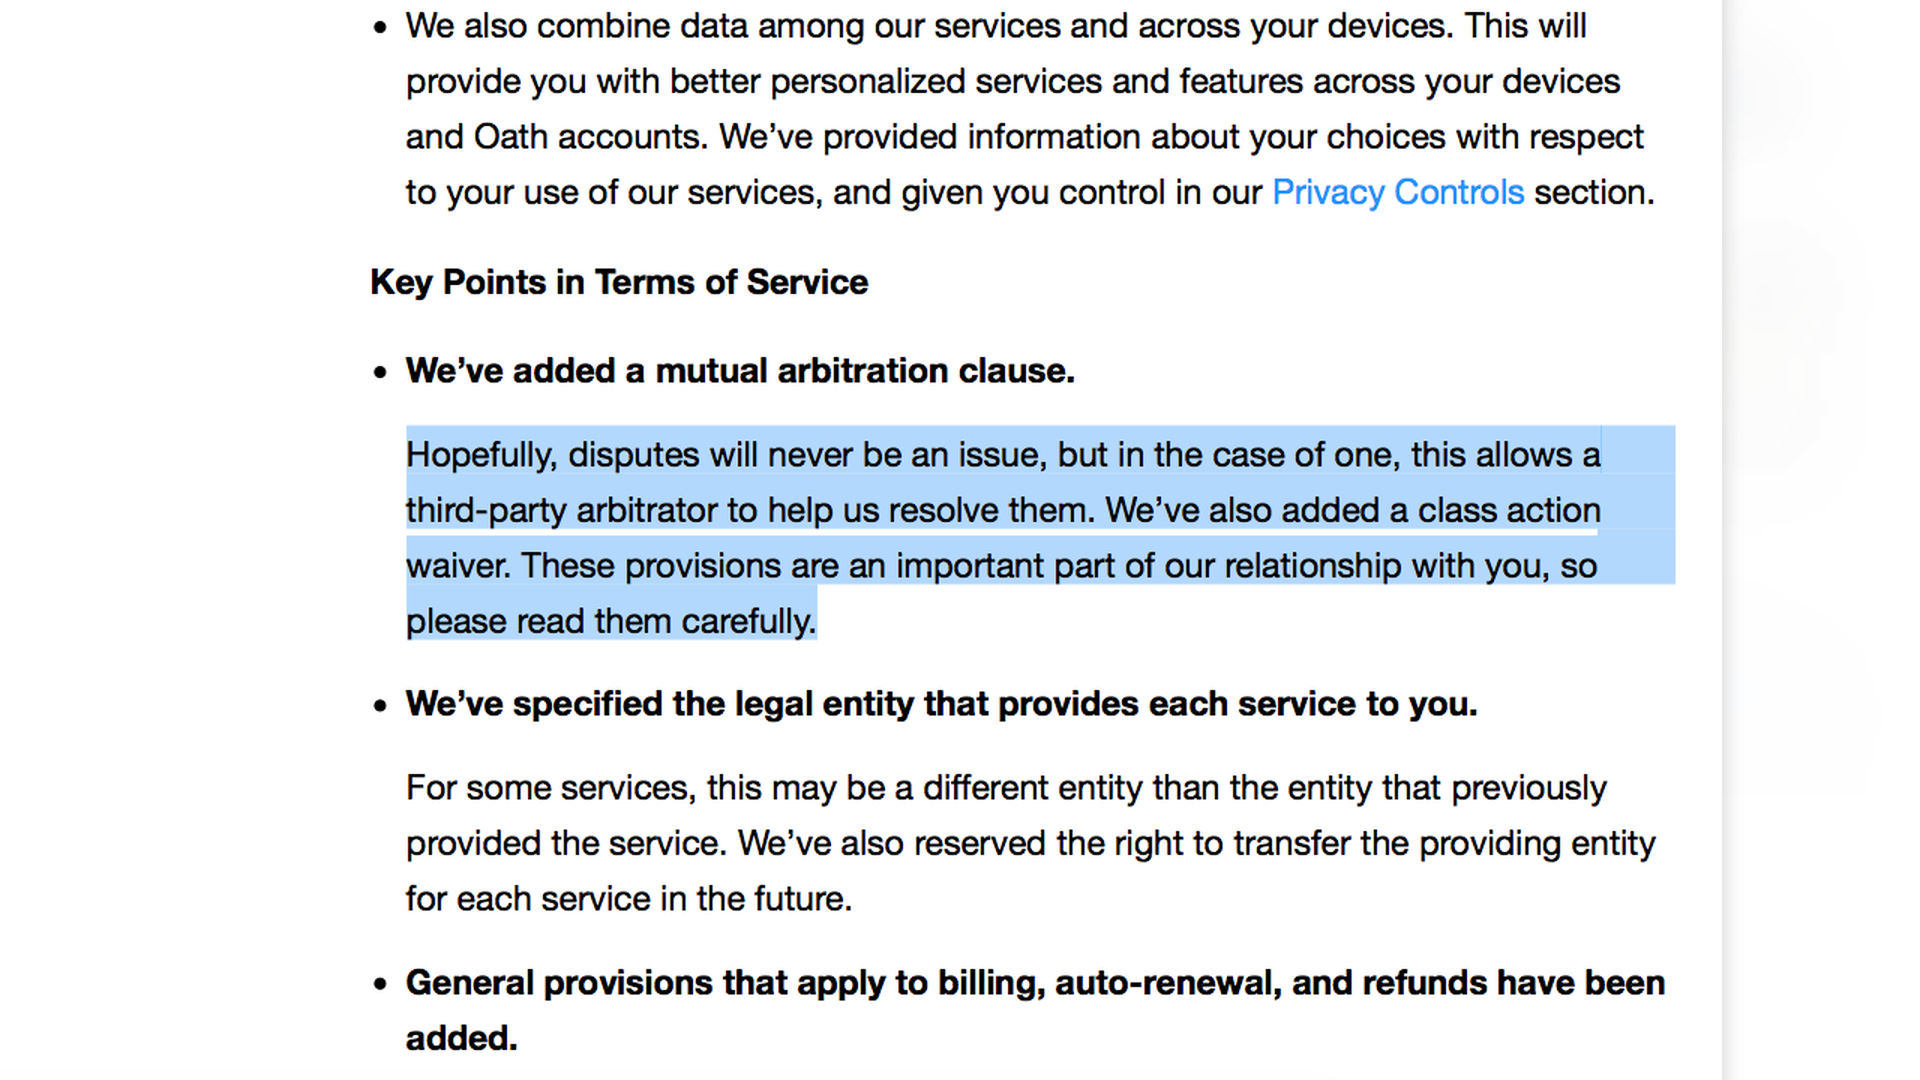 Oath's new terms of service forcing users to give up their class action lawsuit rights.